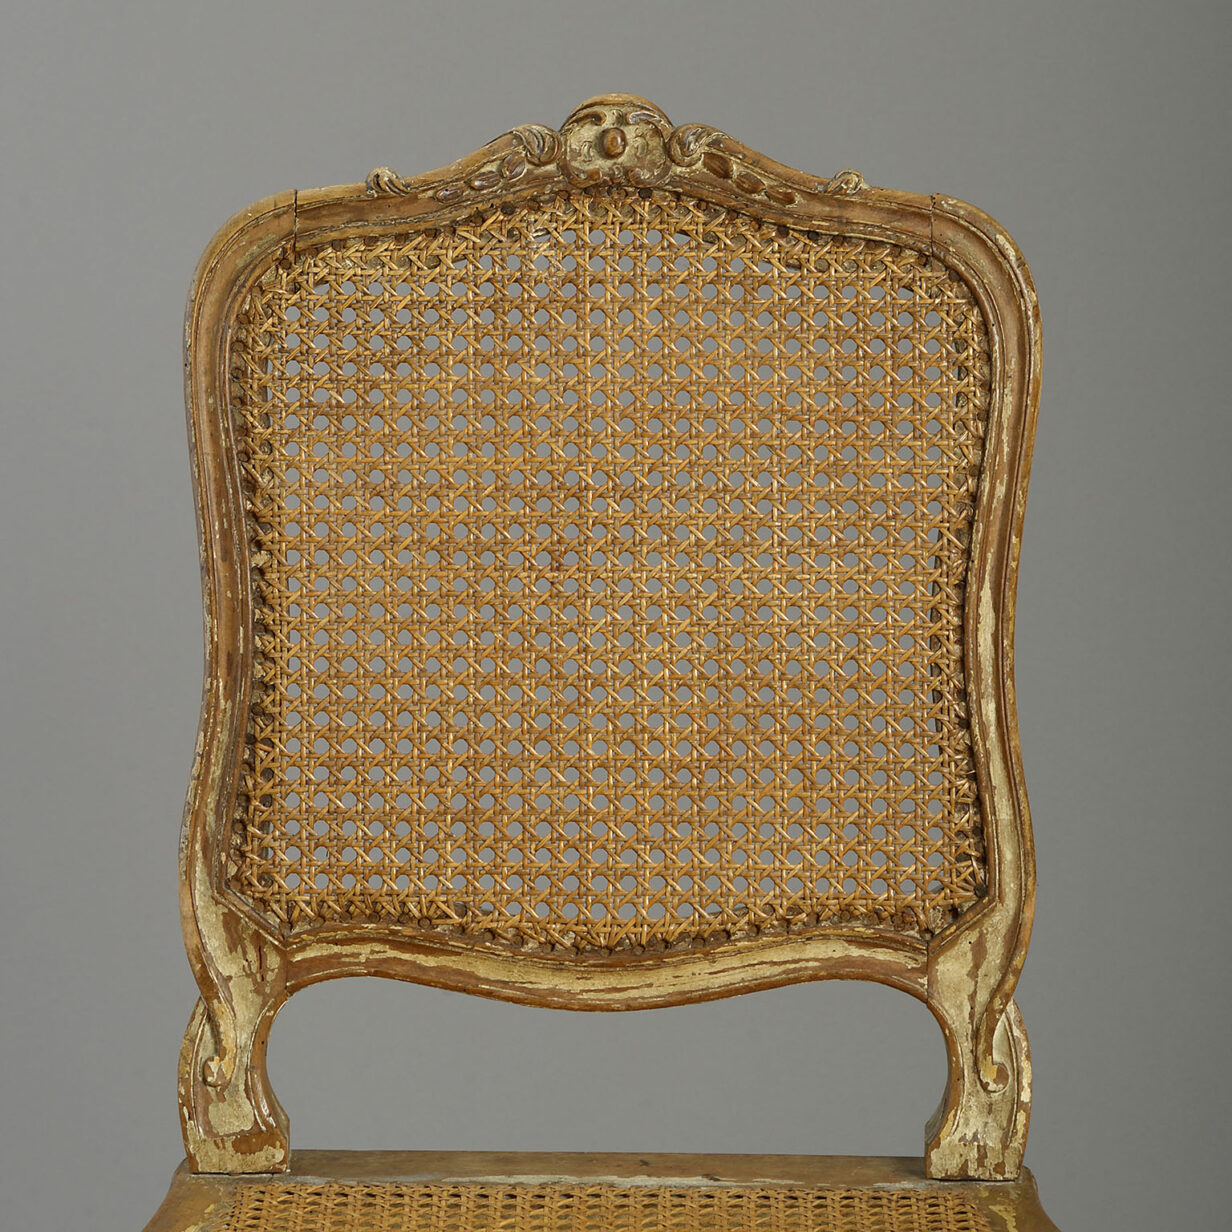 Pair of carved and painted side chairs in the louis xvi manner